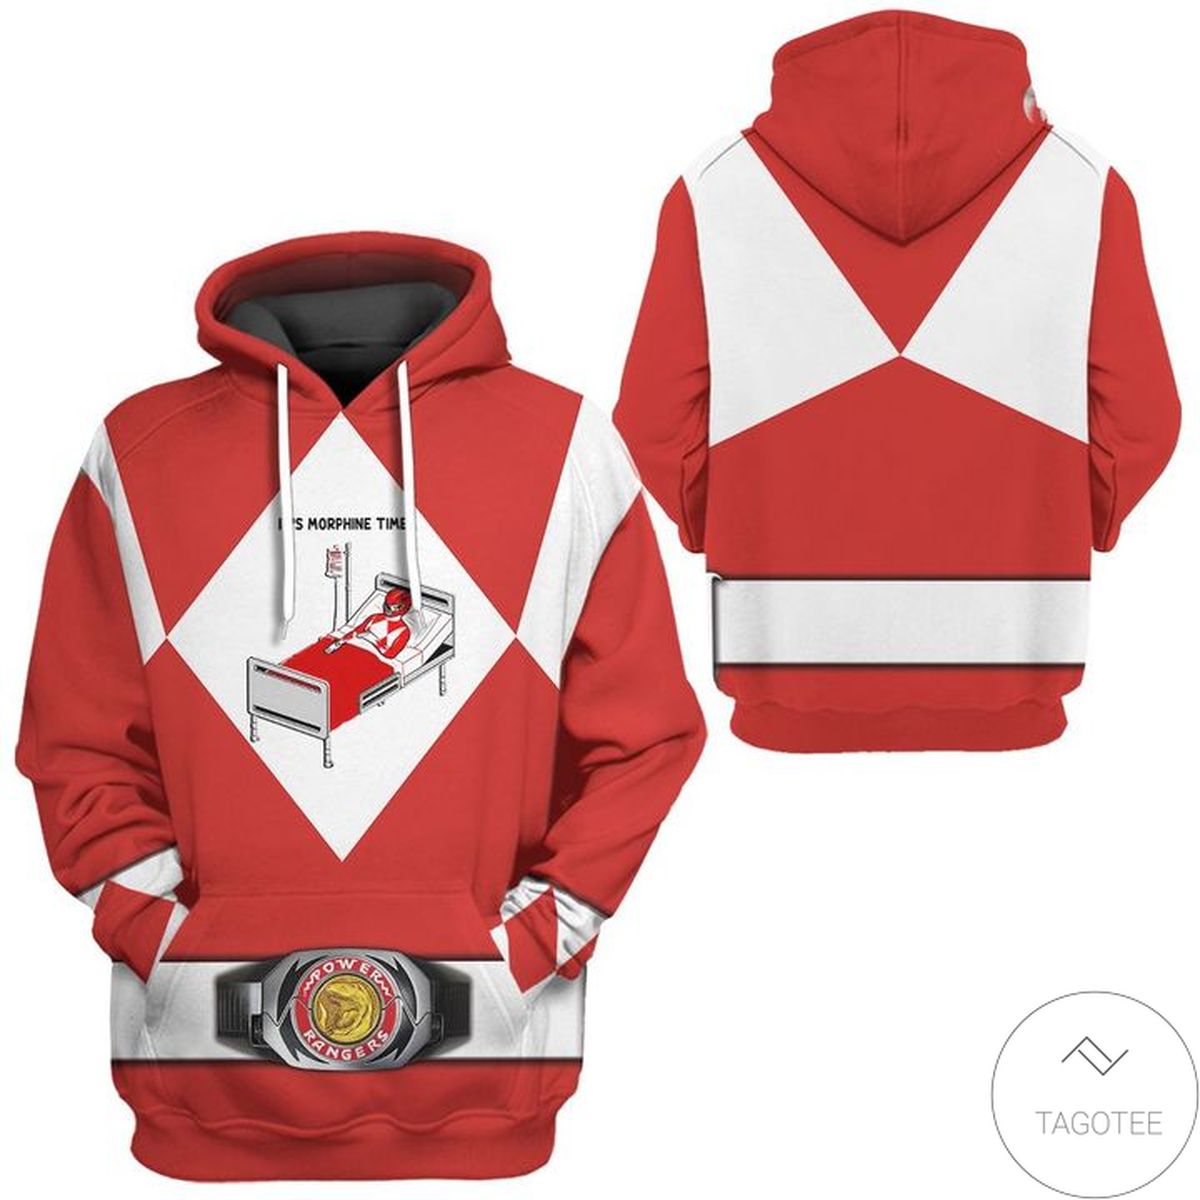 It's Morphin Time Red Ranger Hoodie